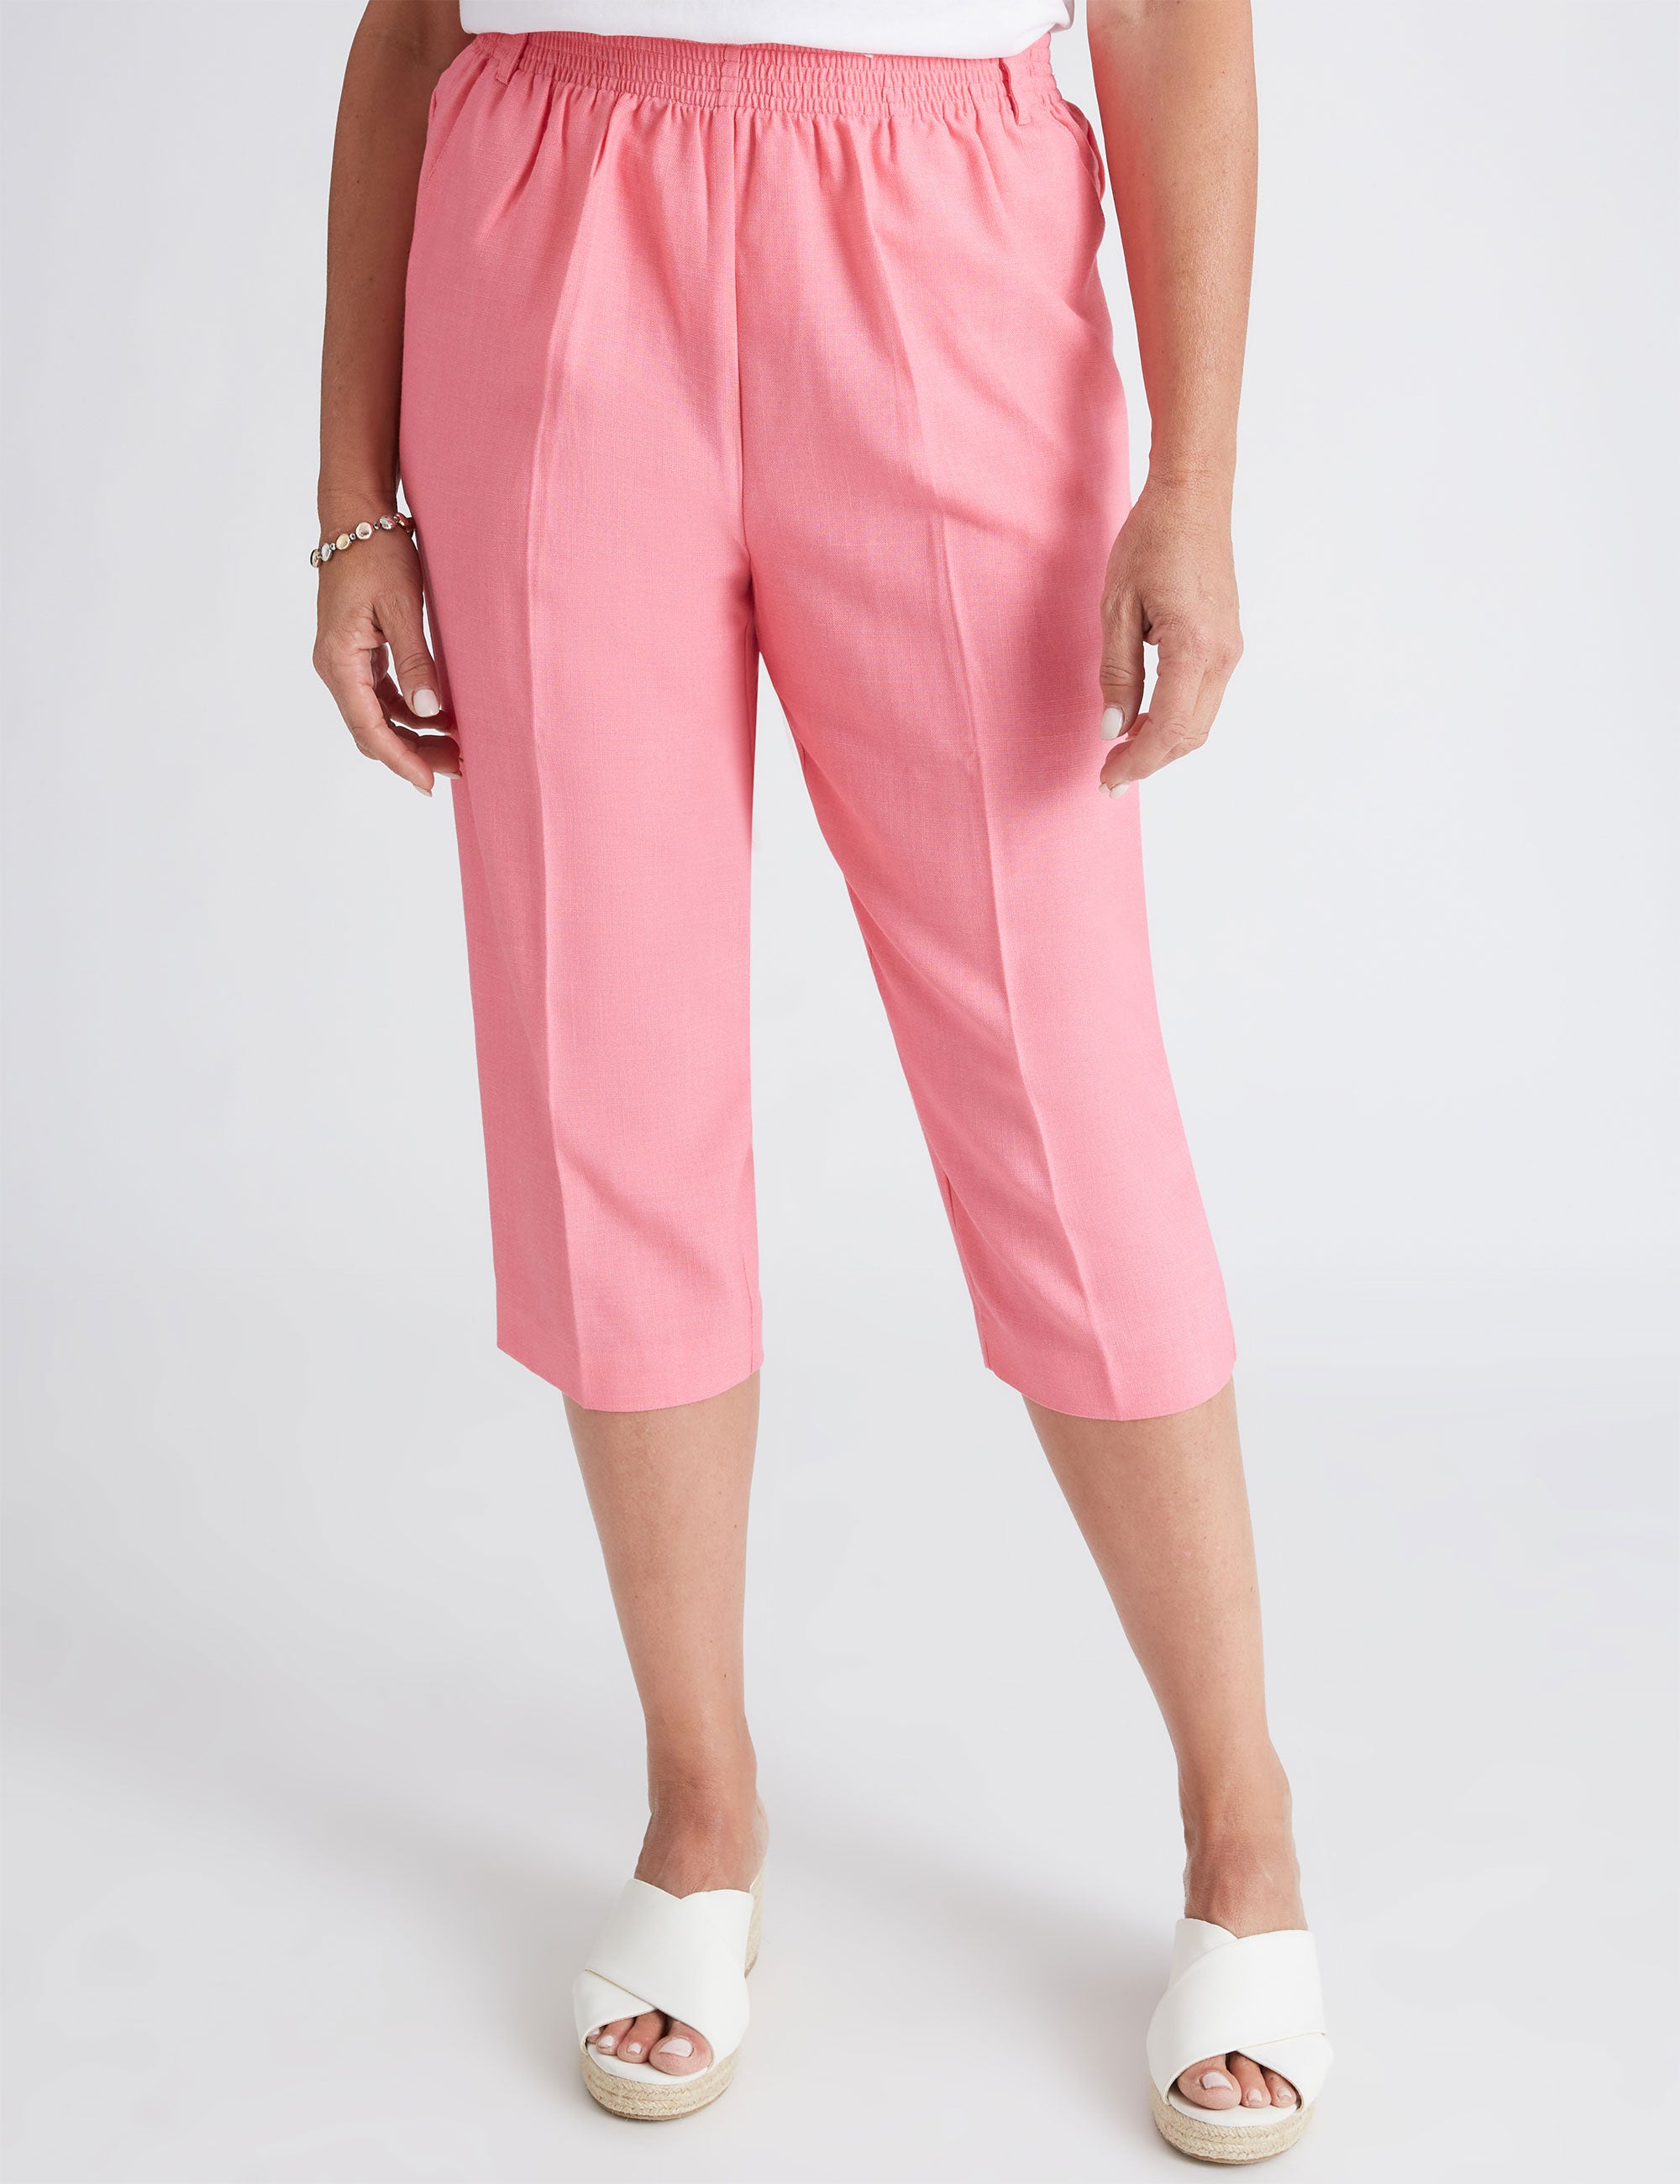 Pink Capri and cropped pants for Women